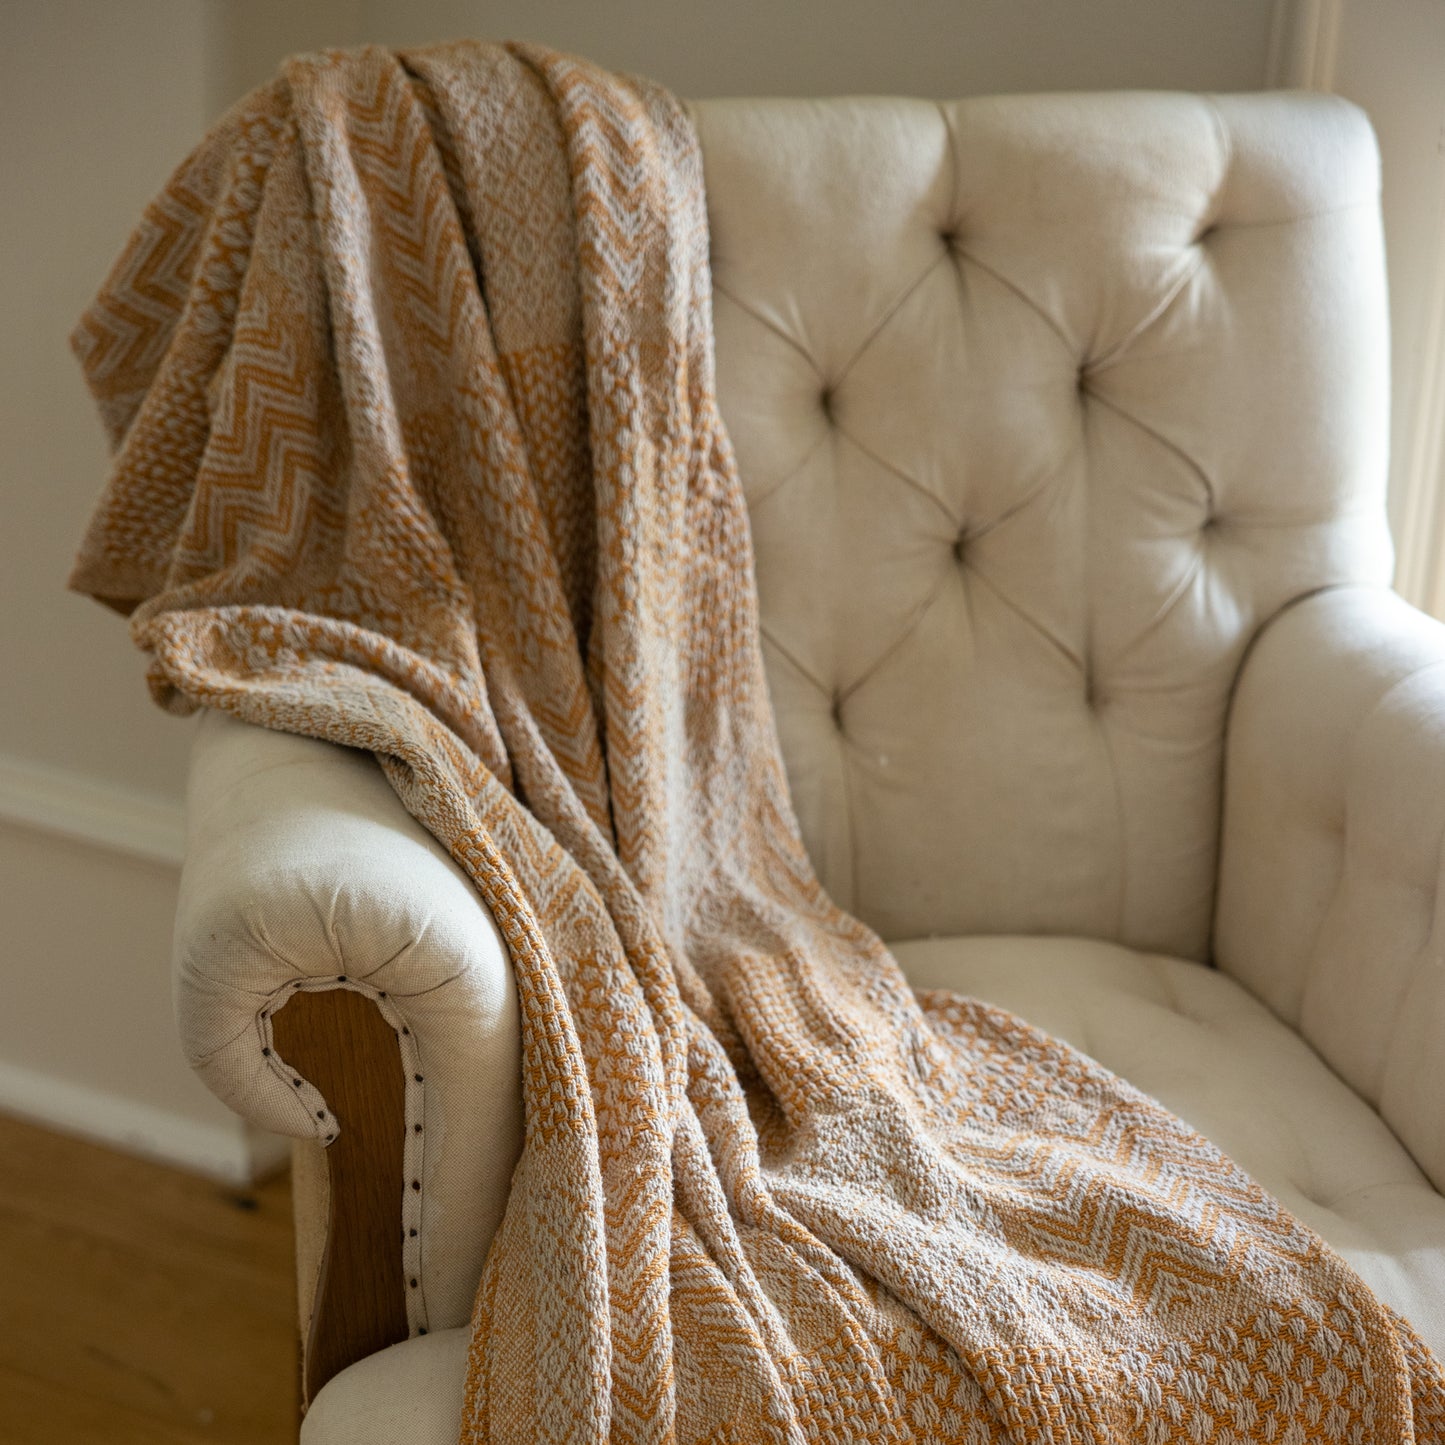 Knit Throw with Fringe